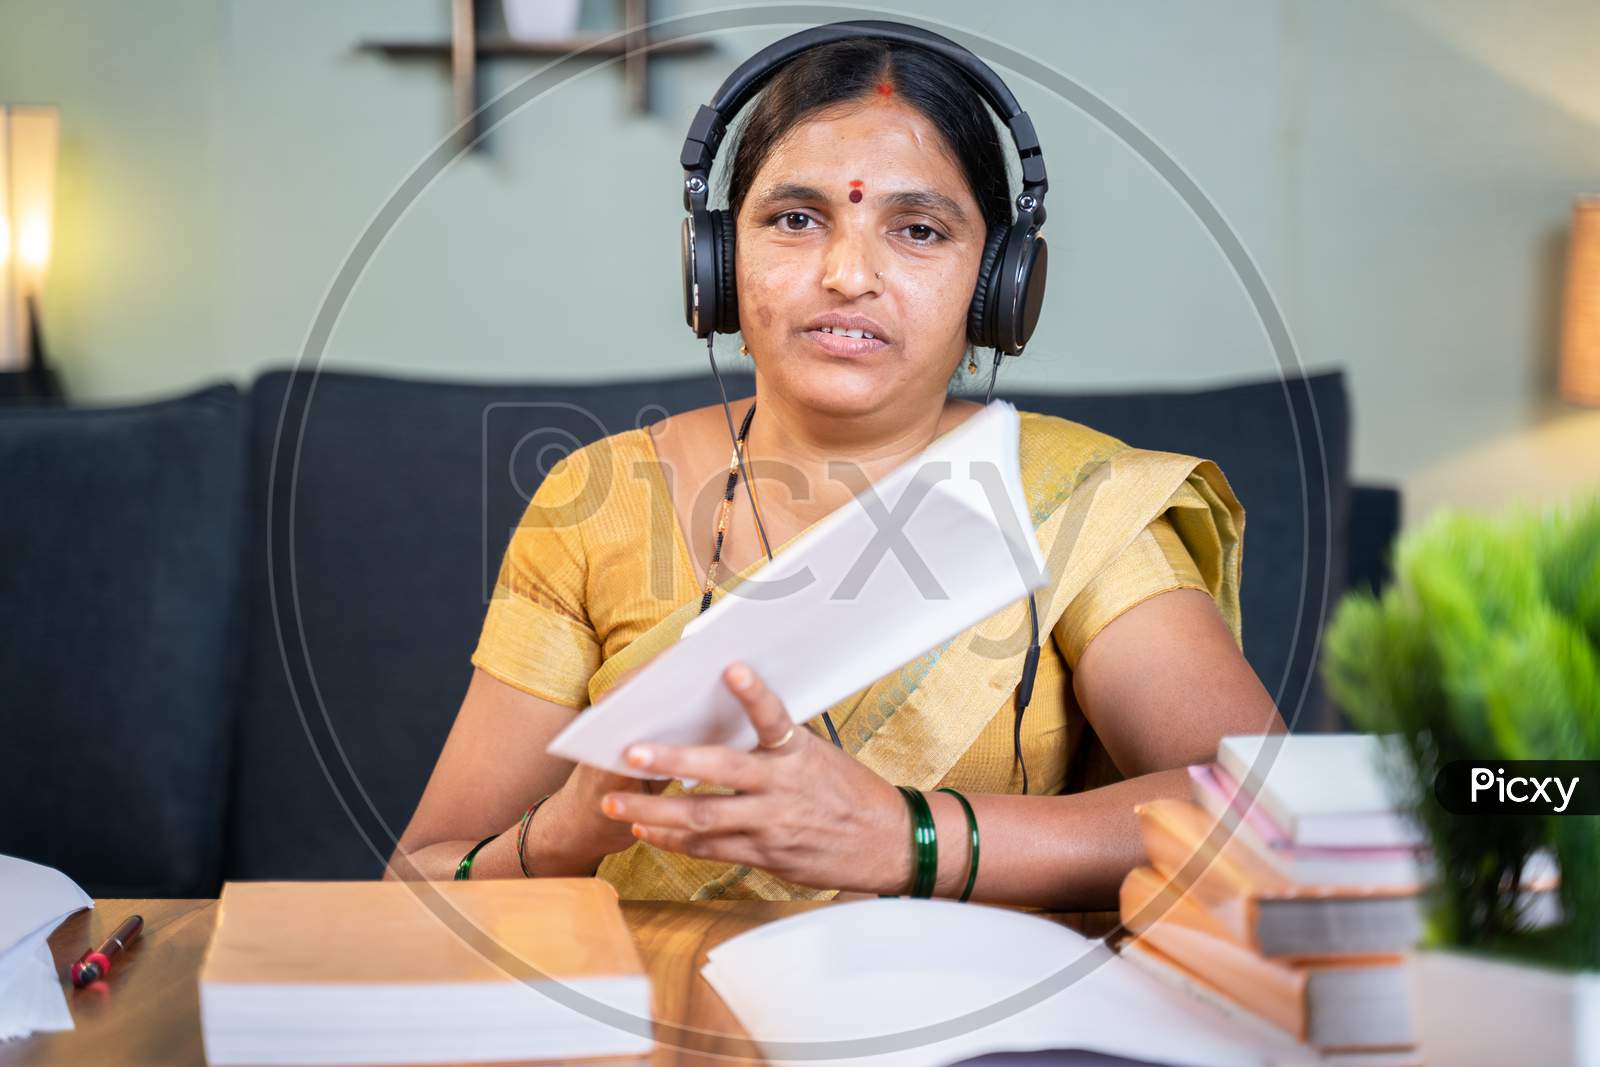 Indian Woman Busy Explaining From Book During Online Class By Looking Camera At Home - Concept Of E-Teaching, Remote Learning, Virtual Education During Coronavirus Pandemic